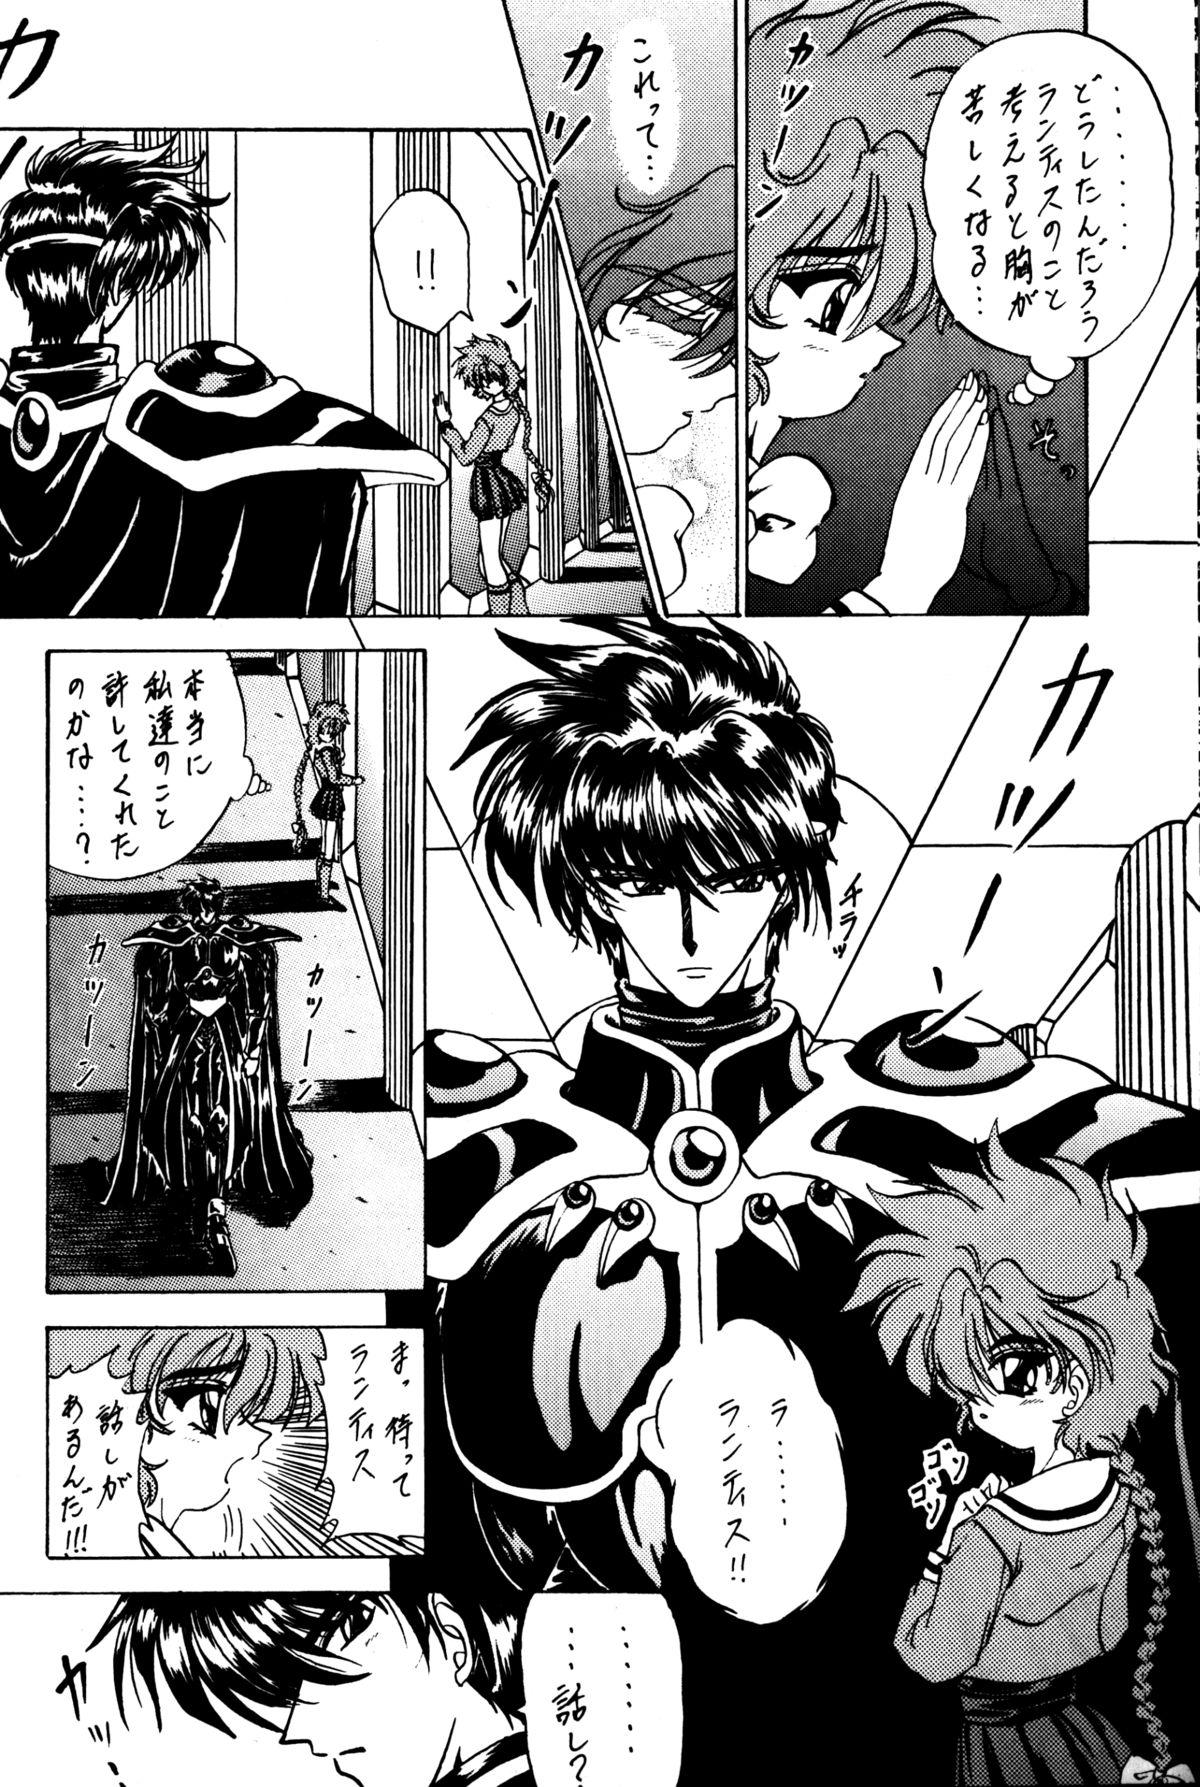 Freaky Stale World II - Magic knight rayearth Friends - Page 5